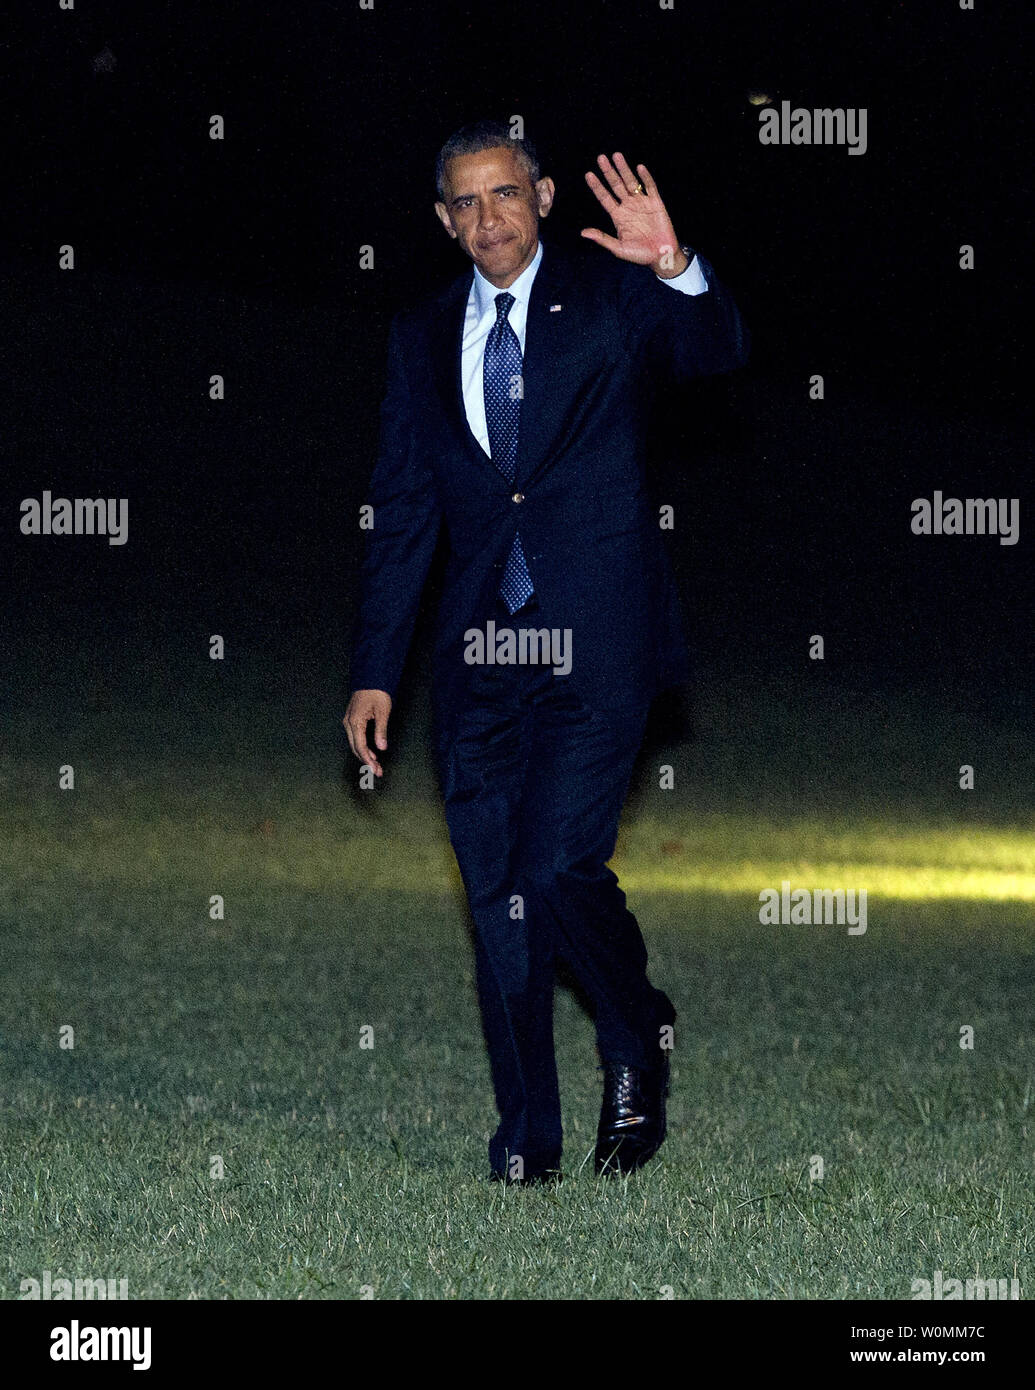 United States President Barack Obama waves to the photographers as he arrives on the South Lawn of the White House in Washington, D.C. following a trip to Galesburg, Illinois and Warrensburg, Missouri to deliver speeches on the economy on July 24, 2013.    UPI/Ron Sachs/ Pool Stock Photo